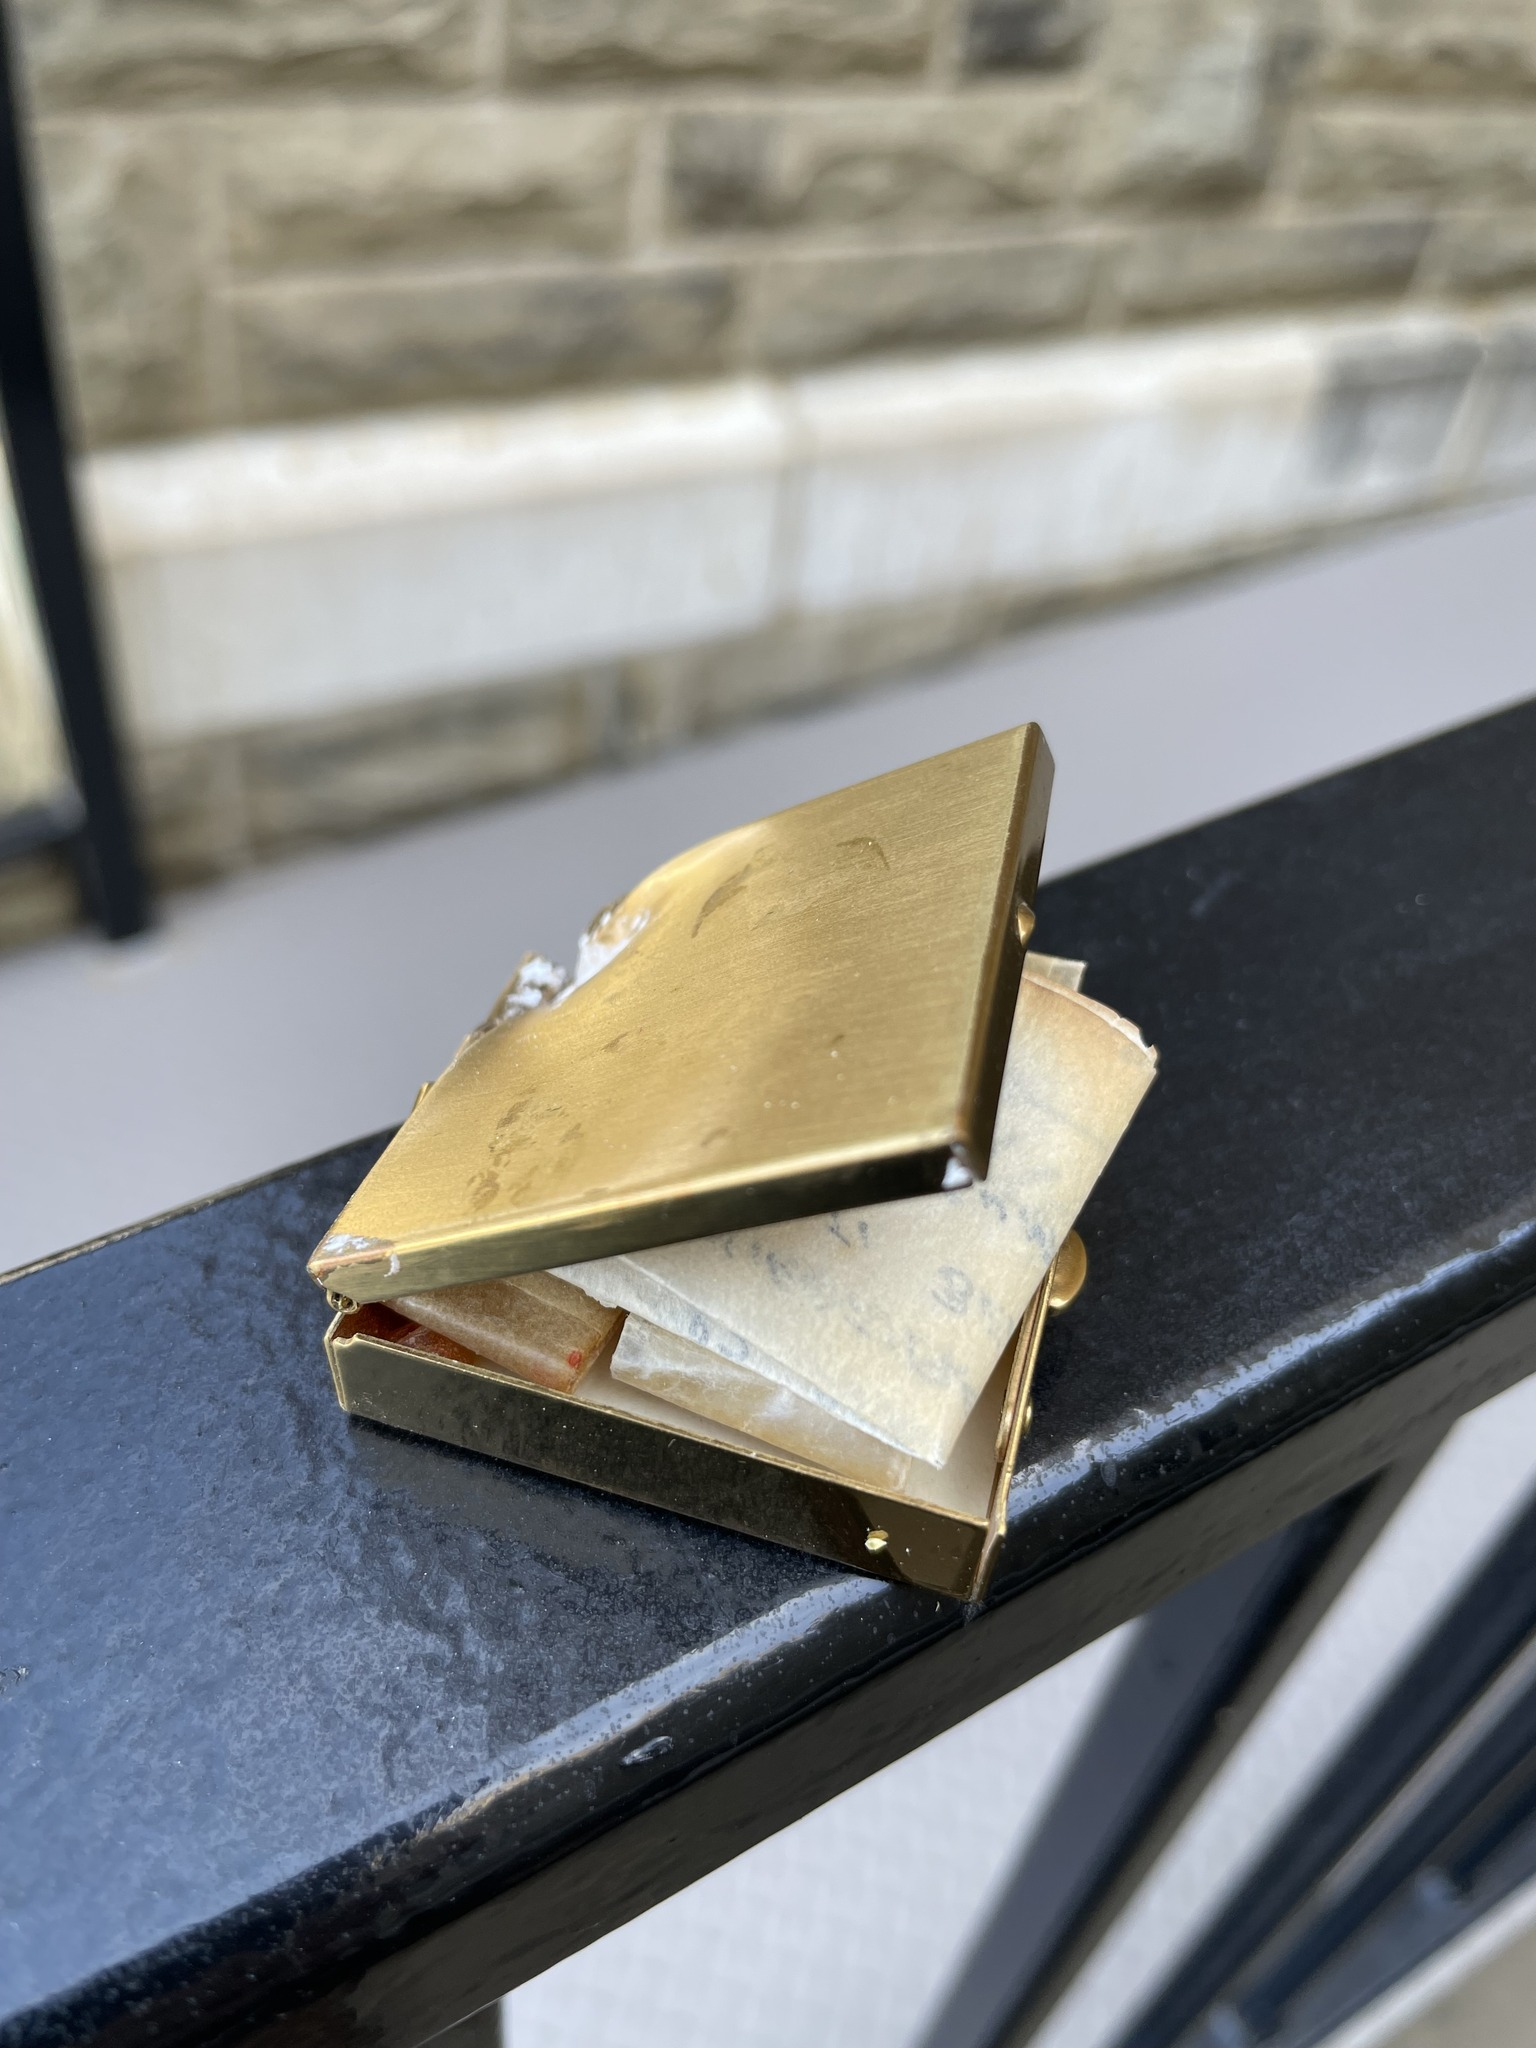 PHOTO: One of the sacred relic containers returned to the Subiaco Abbey after it was stolen on Thursday.